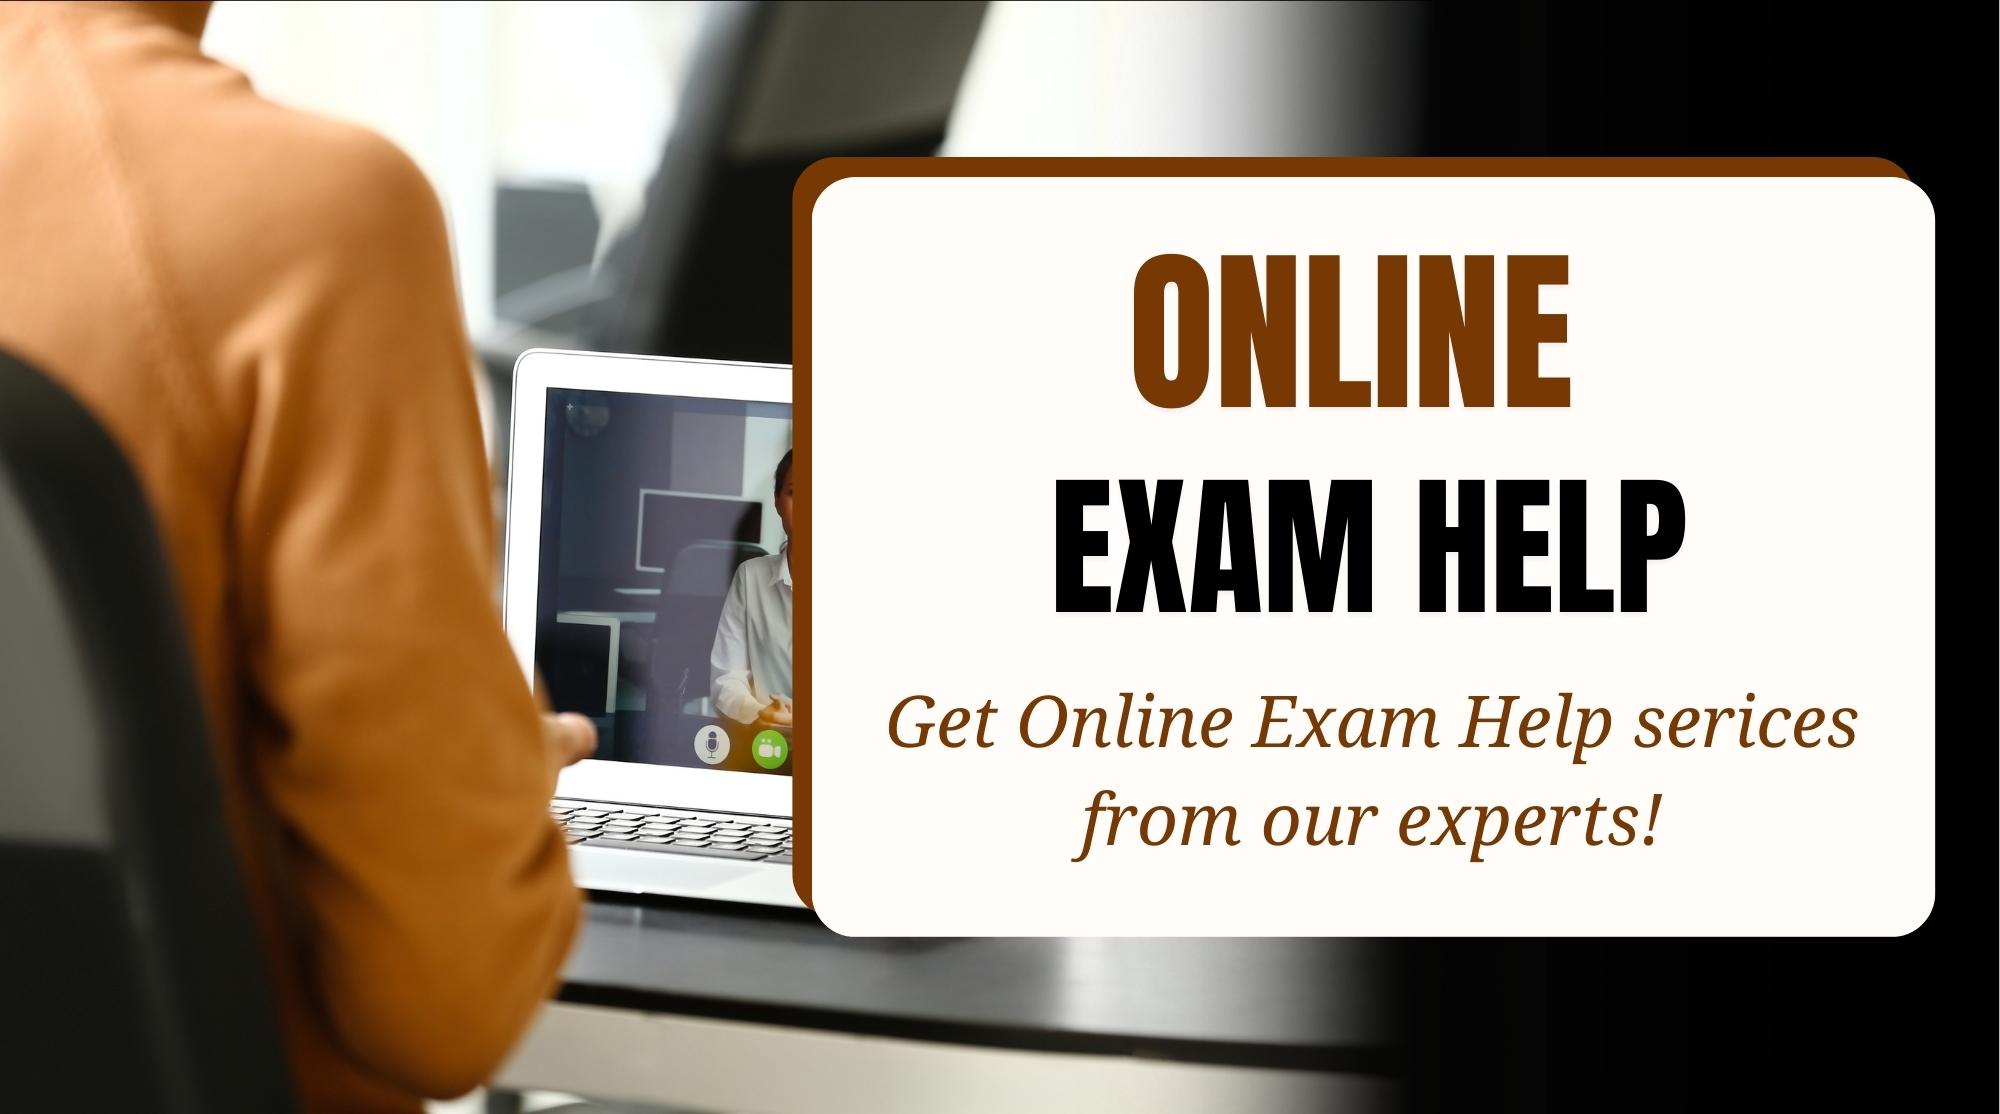 Looking for an Online Exam Help Tutor?